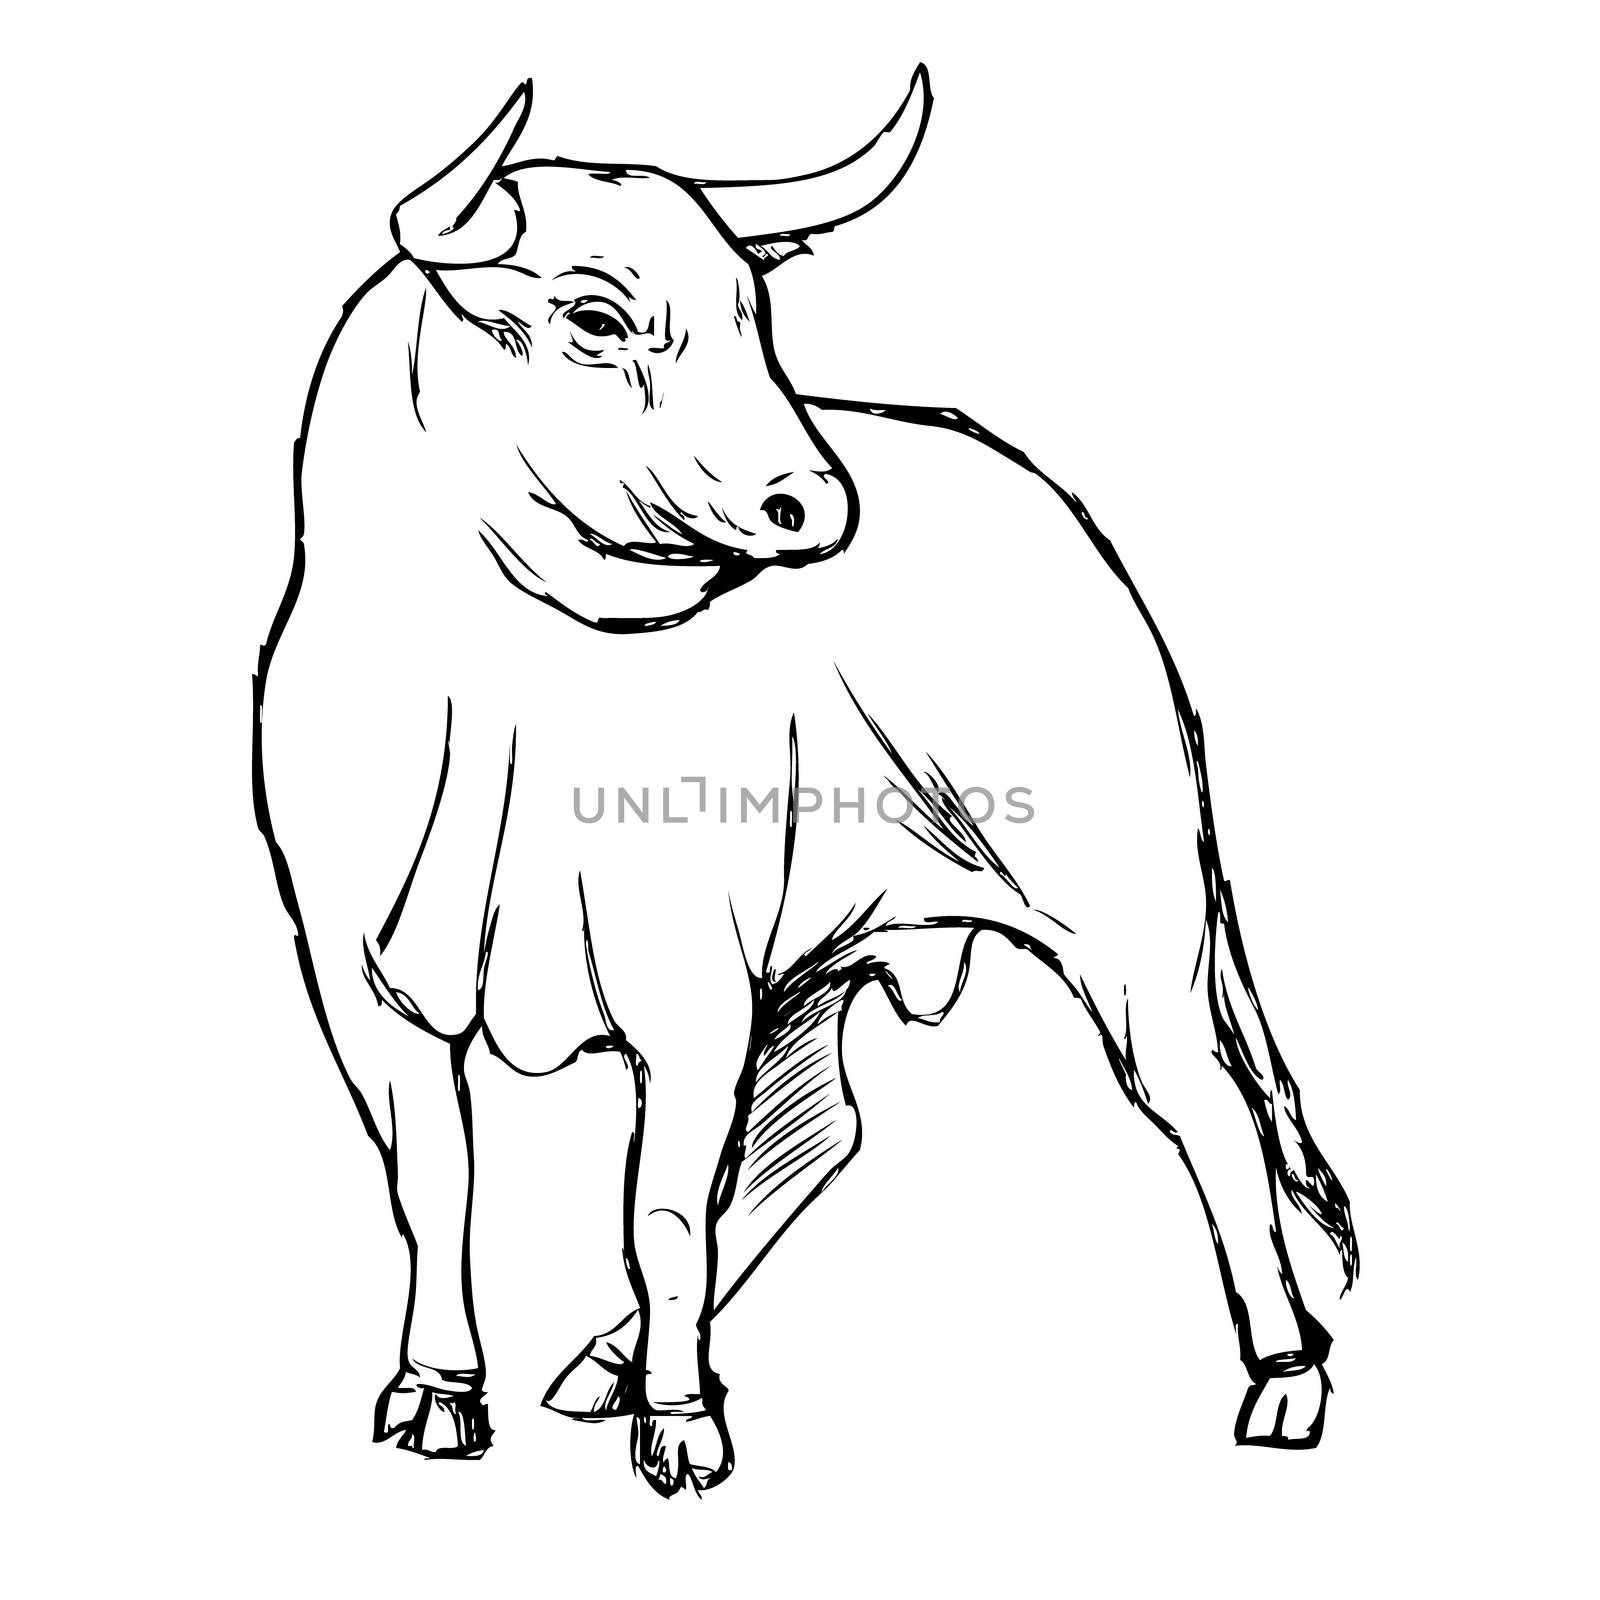 freehand sketch illustration of bul by simpleBE